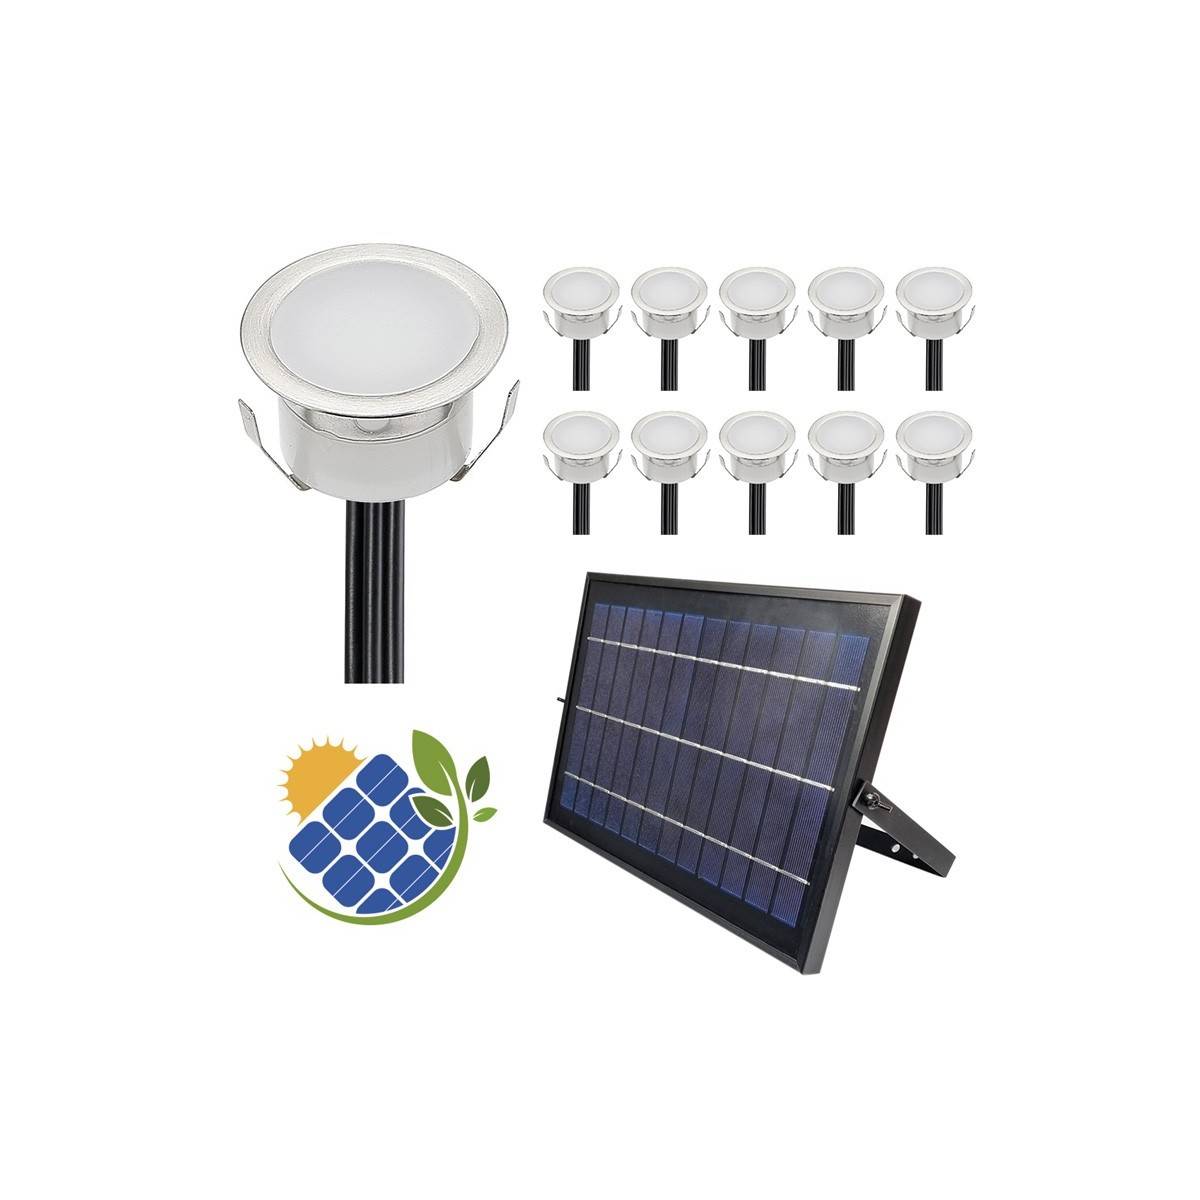 Pack 10 Balizas solares LED empotrables con Panel Solar